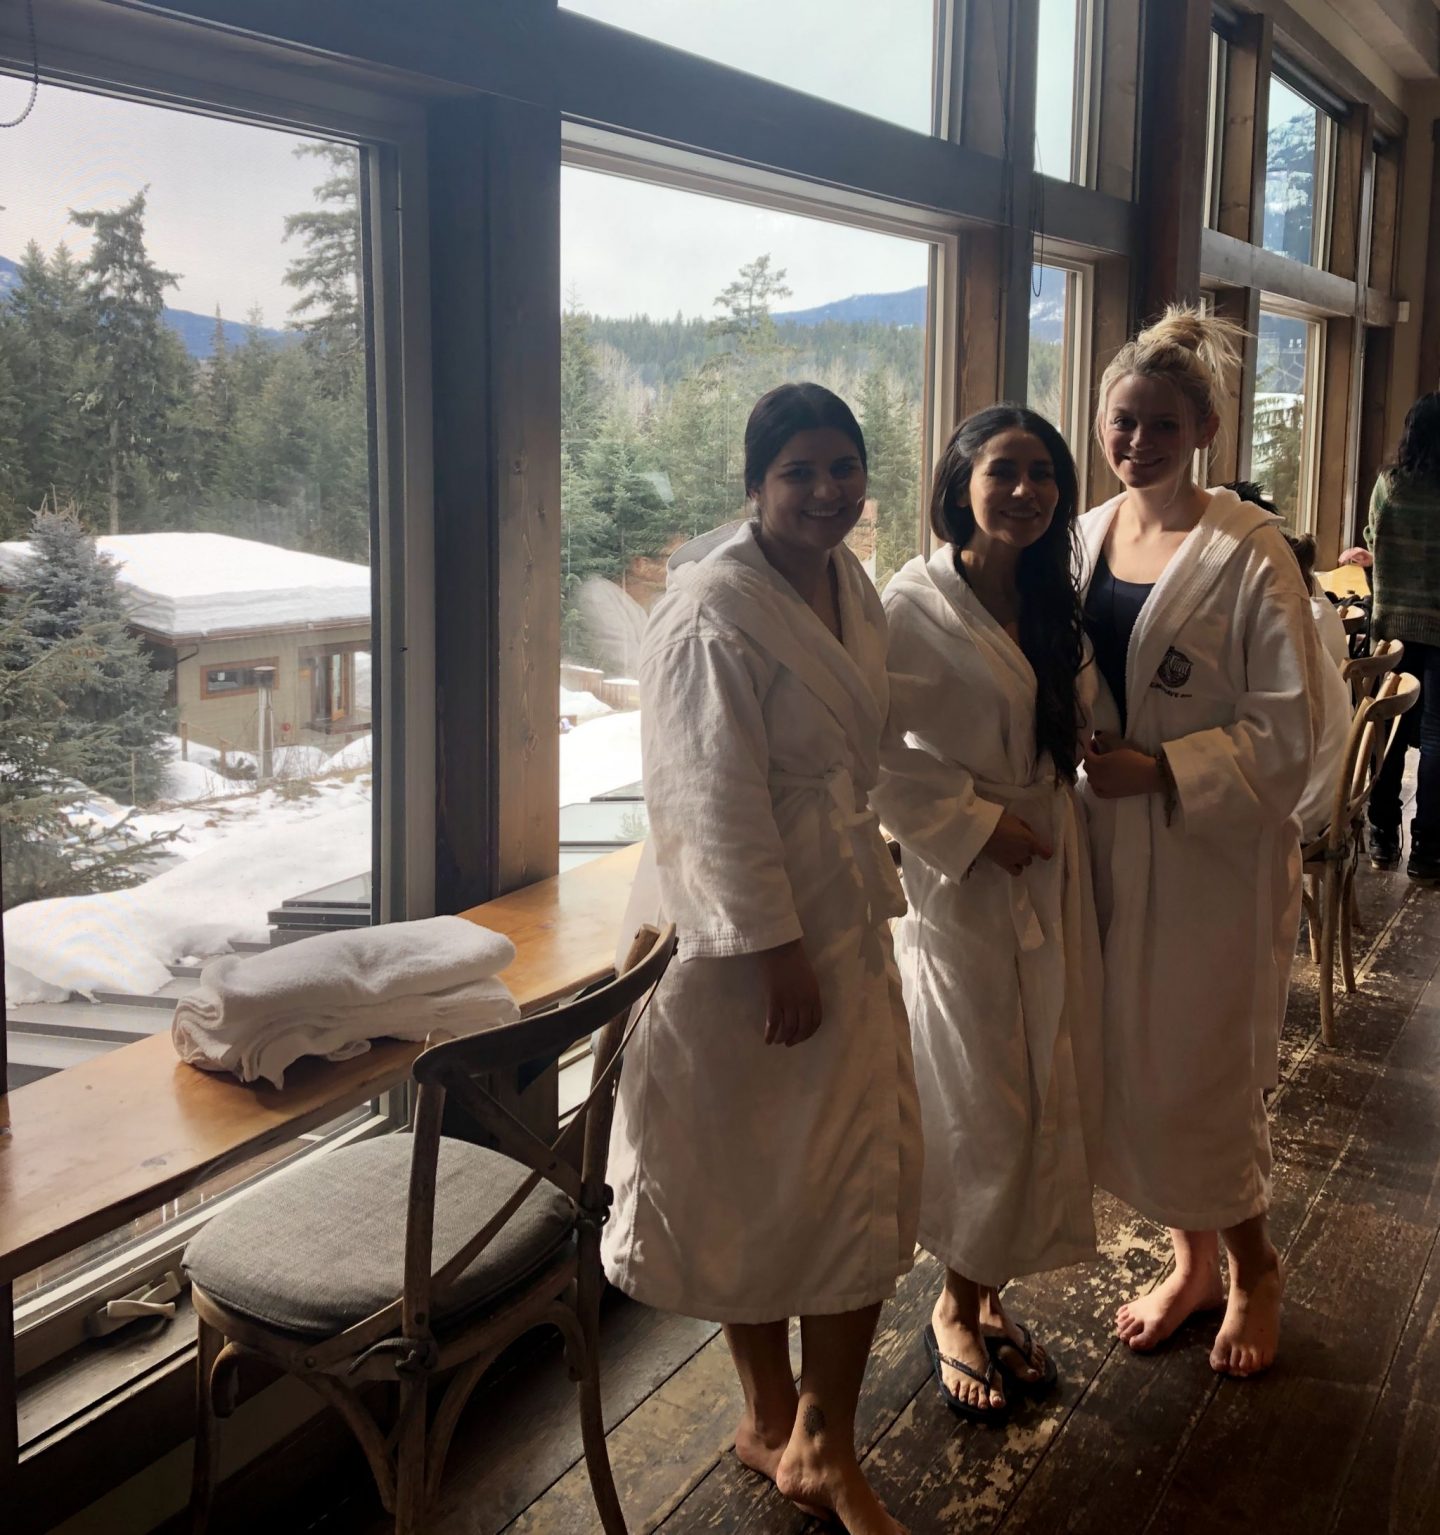 Girls at the Scandinave Spa, Whistler